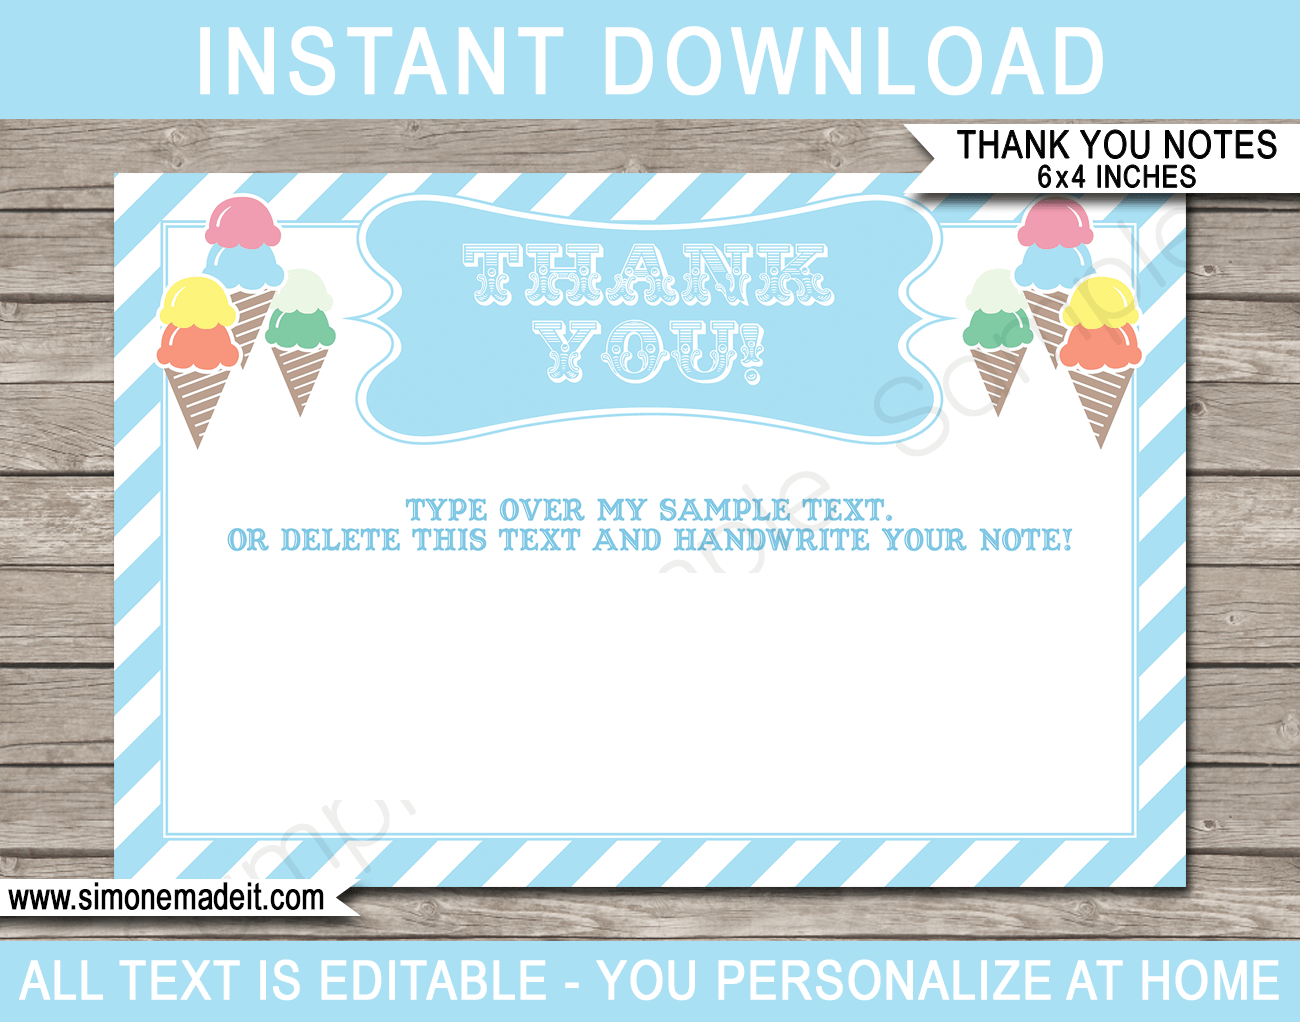 Printable Ice Cream Party Thank You Card Template - Favor Note Tags - Ice Cream Birthday Party theme - Editable Text - Instant Download via simonemadeit.com